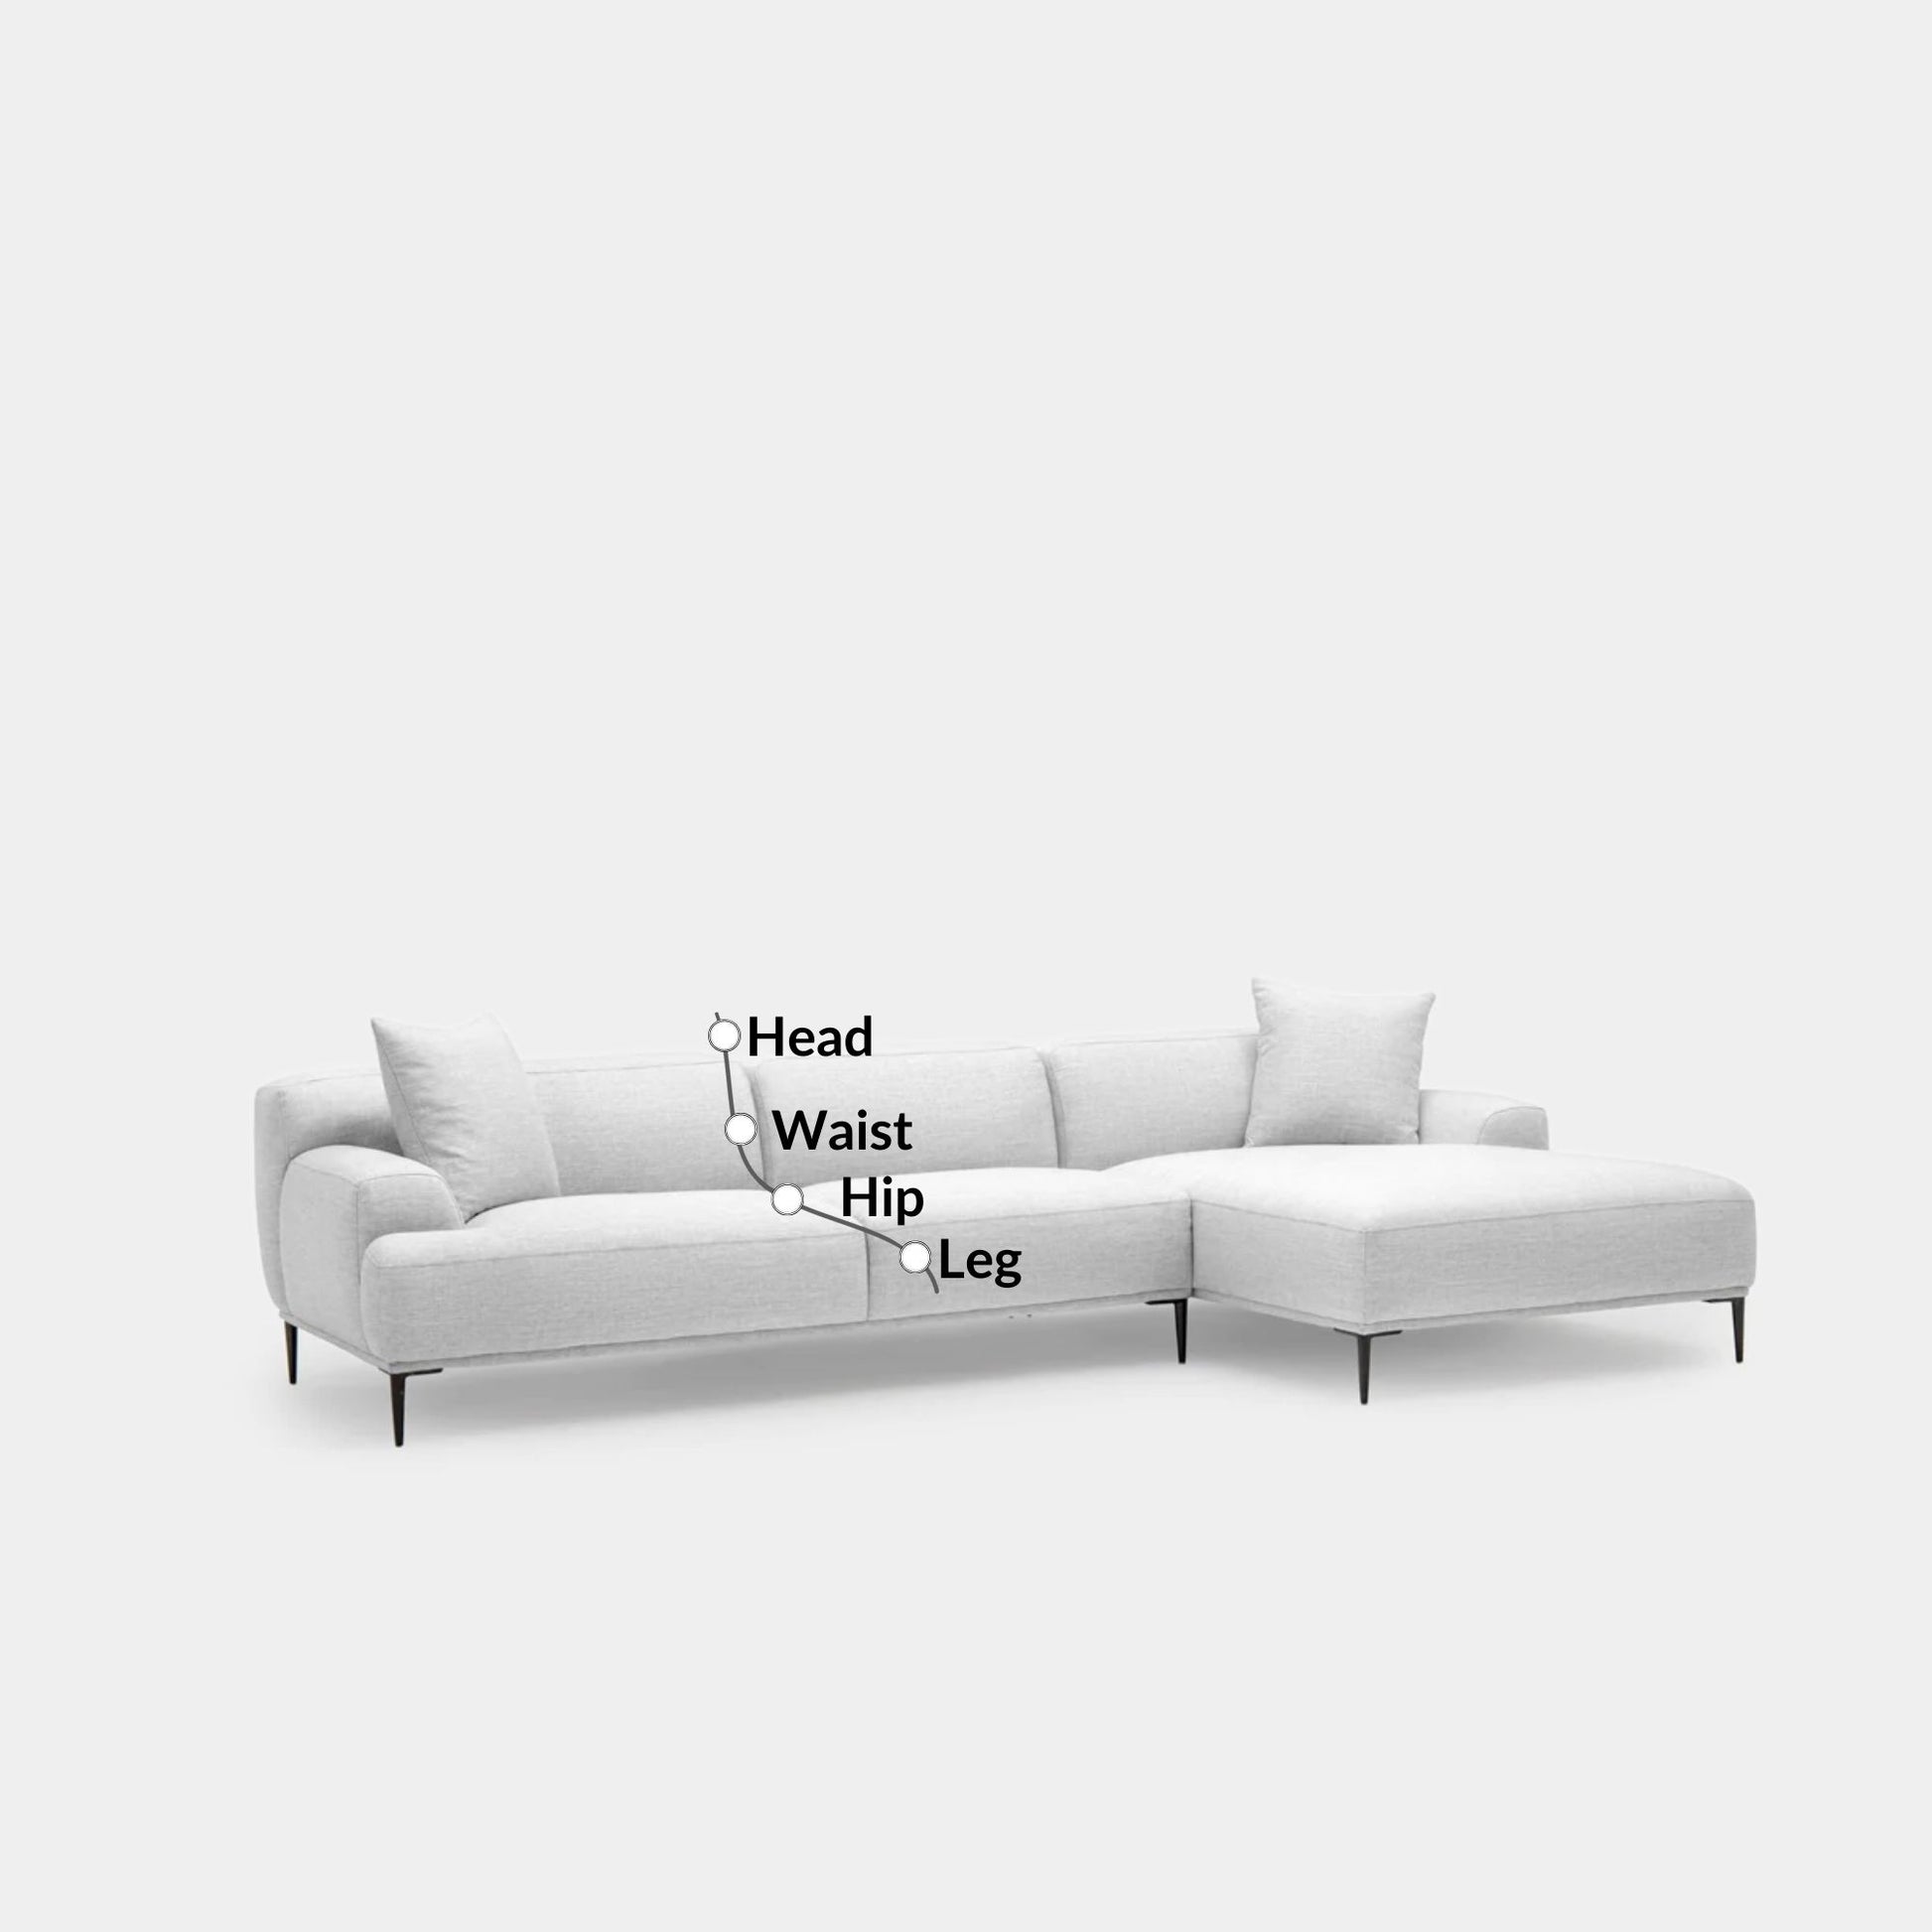 Crystal fabric sectional sofa large right grey